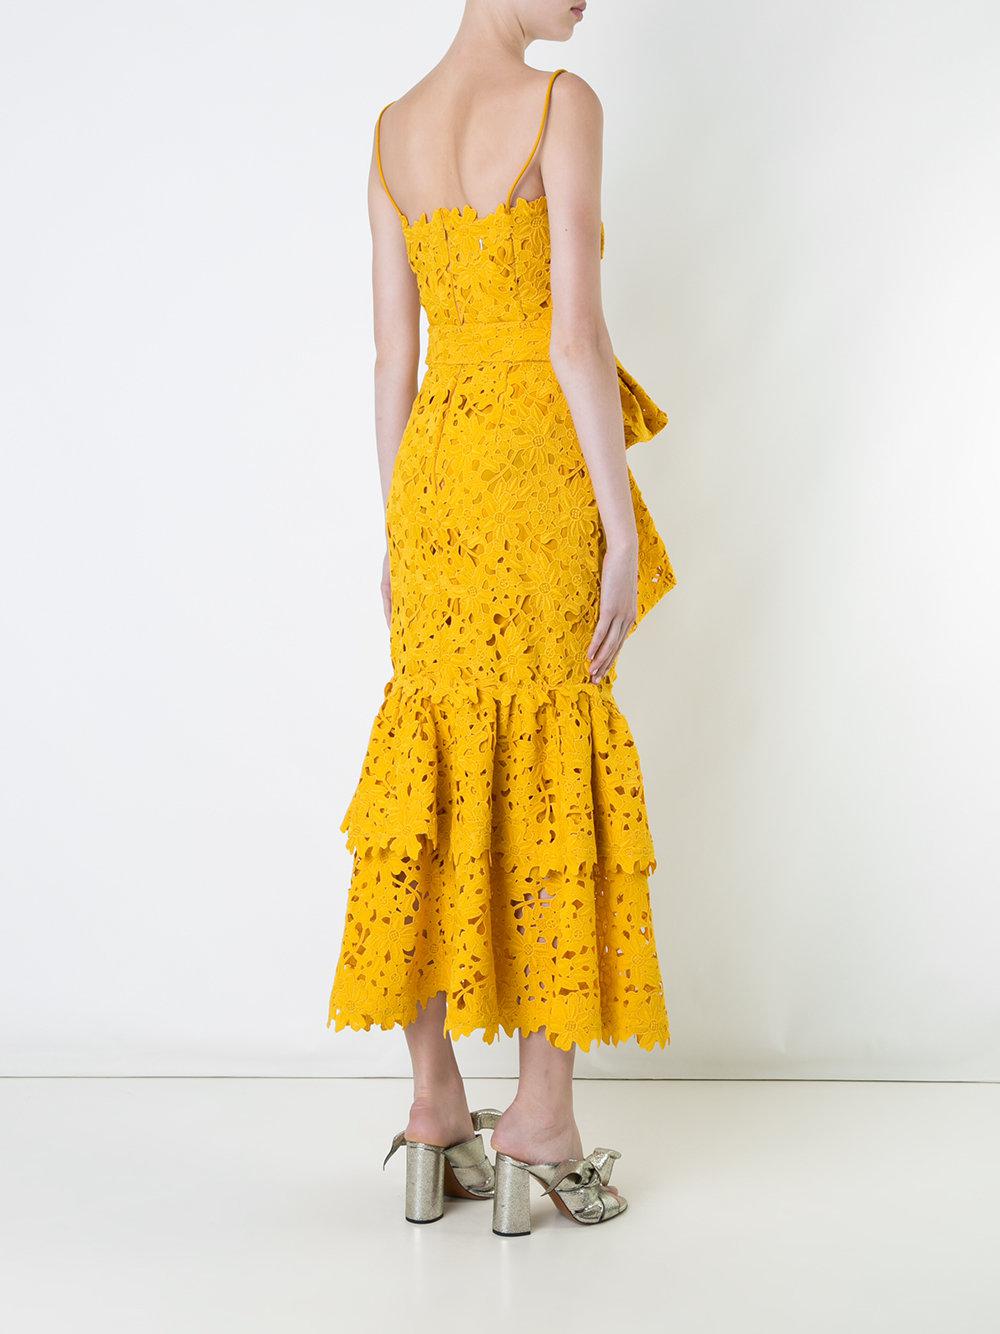 Lyst - Bambah Lace Double Ruffle Dress in Yellow